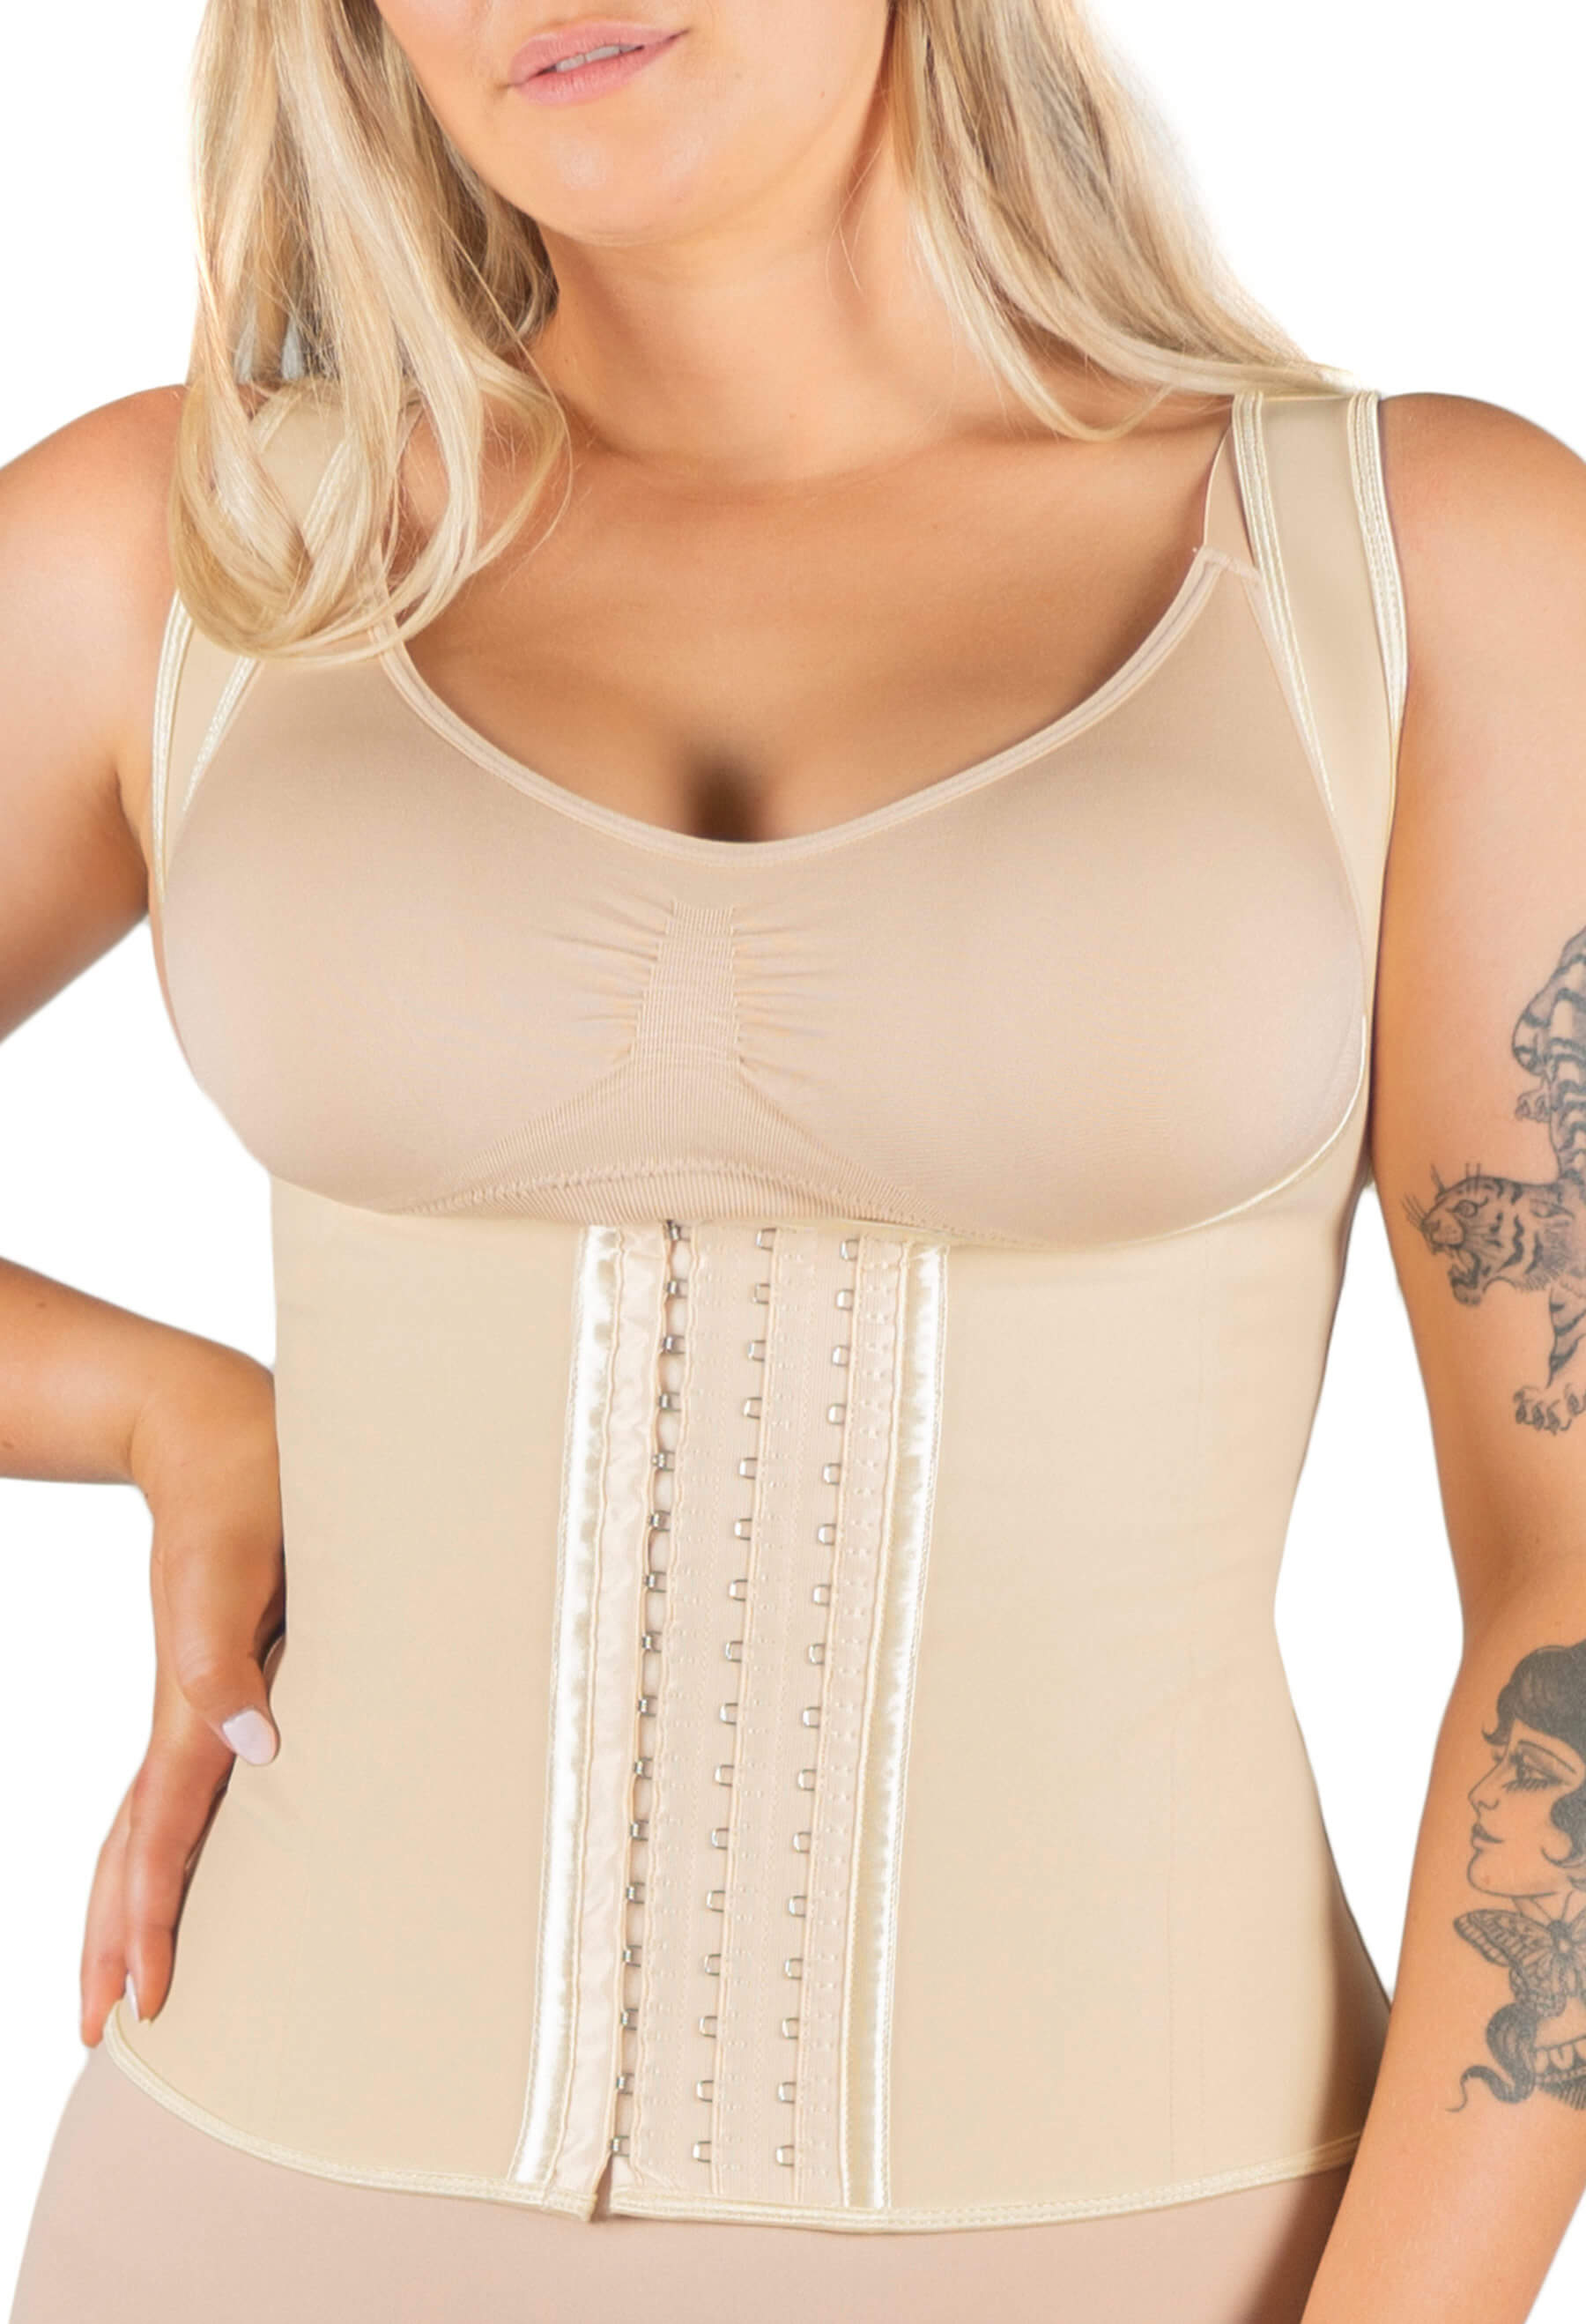 Corset Fitting 101: How to Properly Fit a Corset